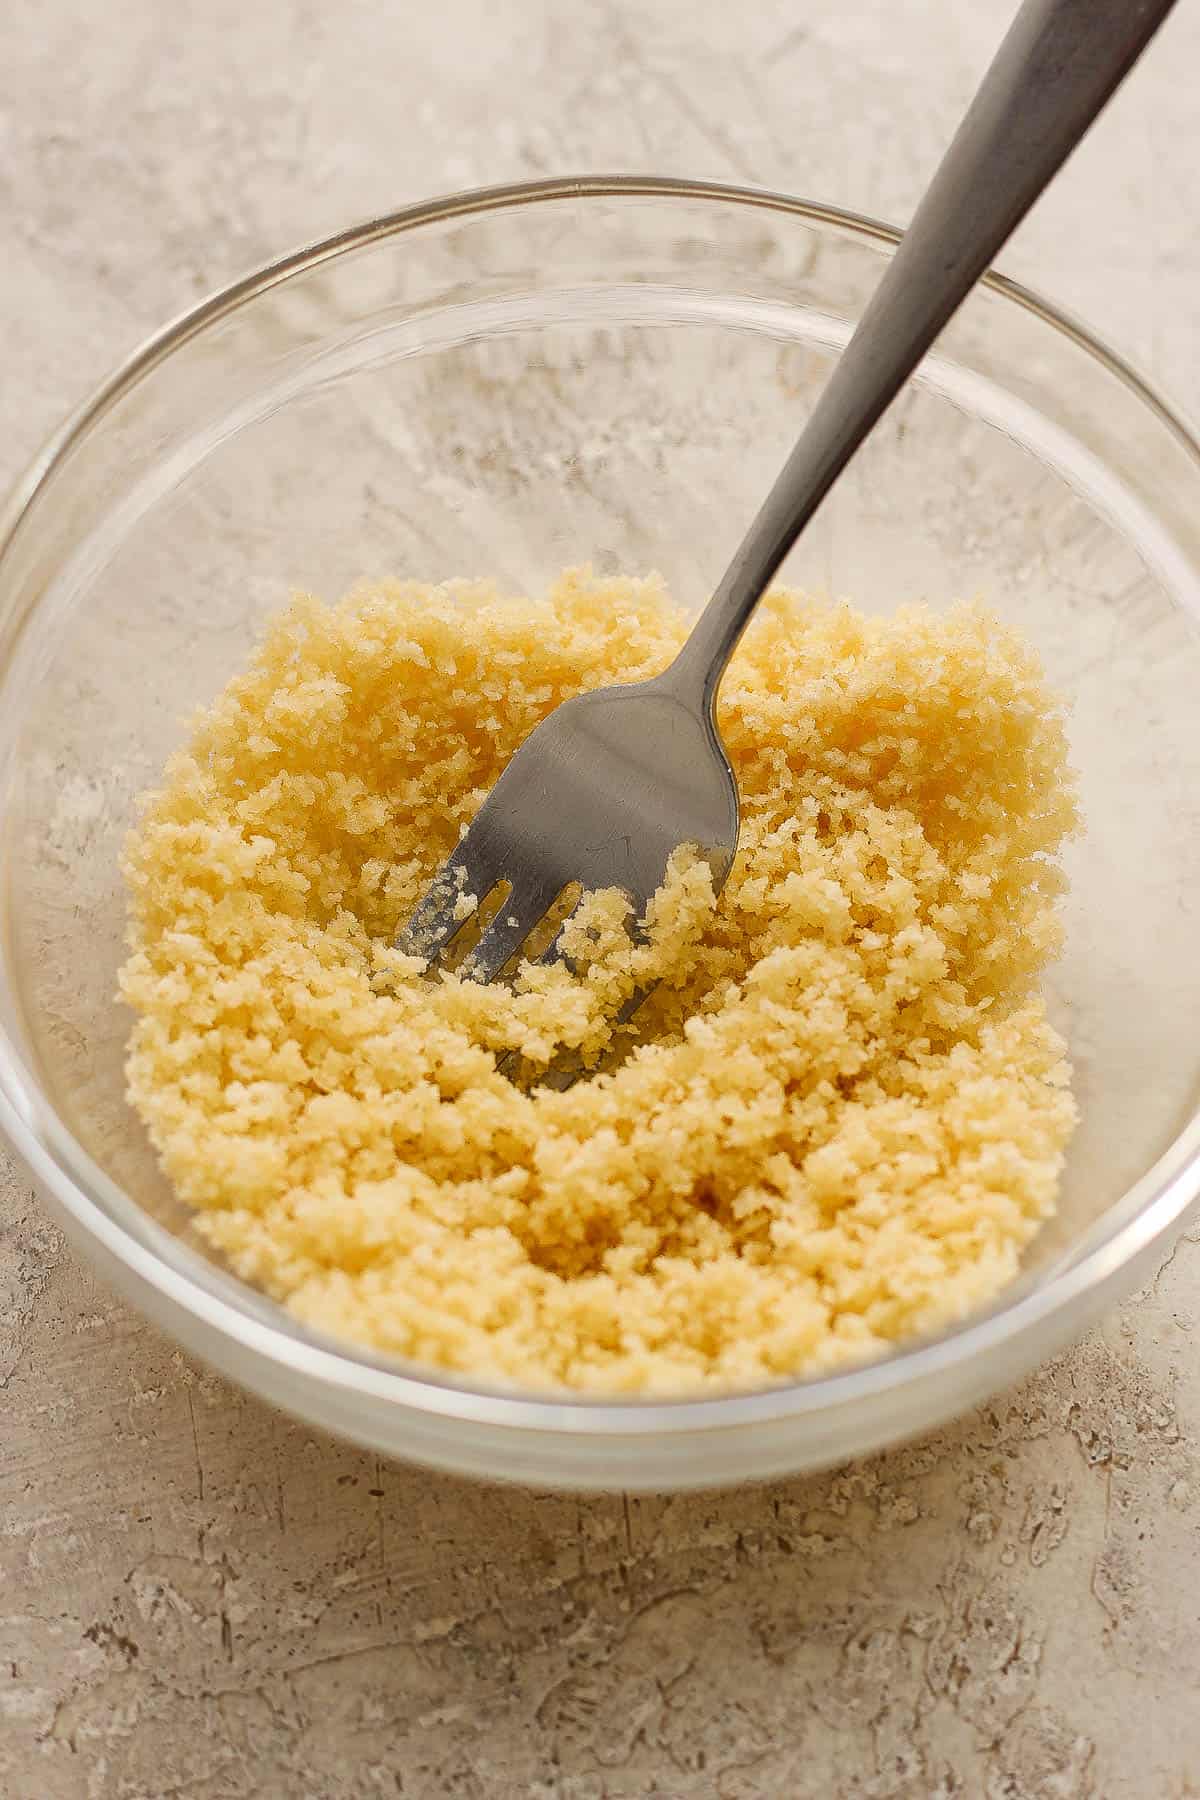 Crispy panko breadcrumbs mixed with melted butter in a bowl.